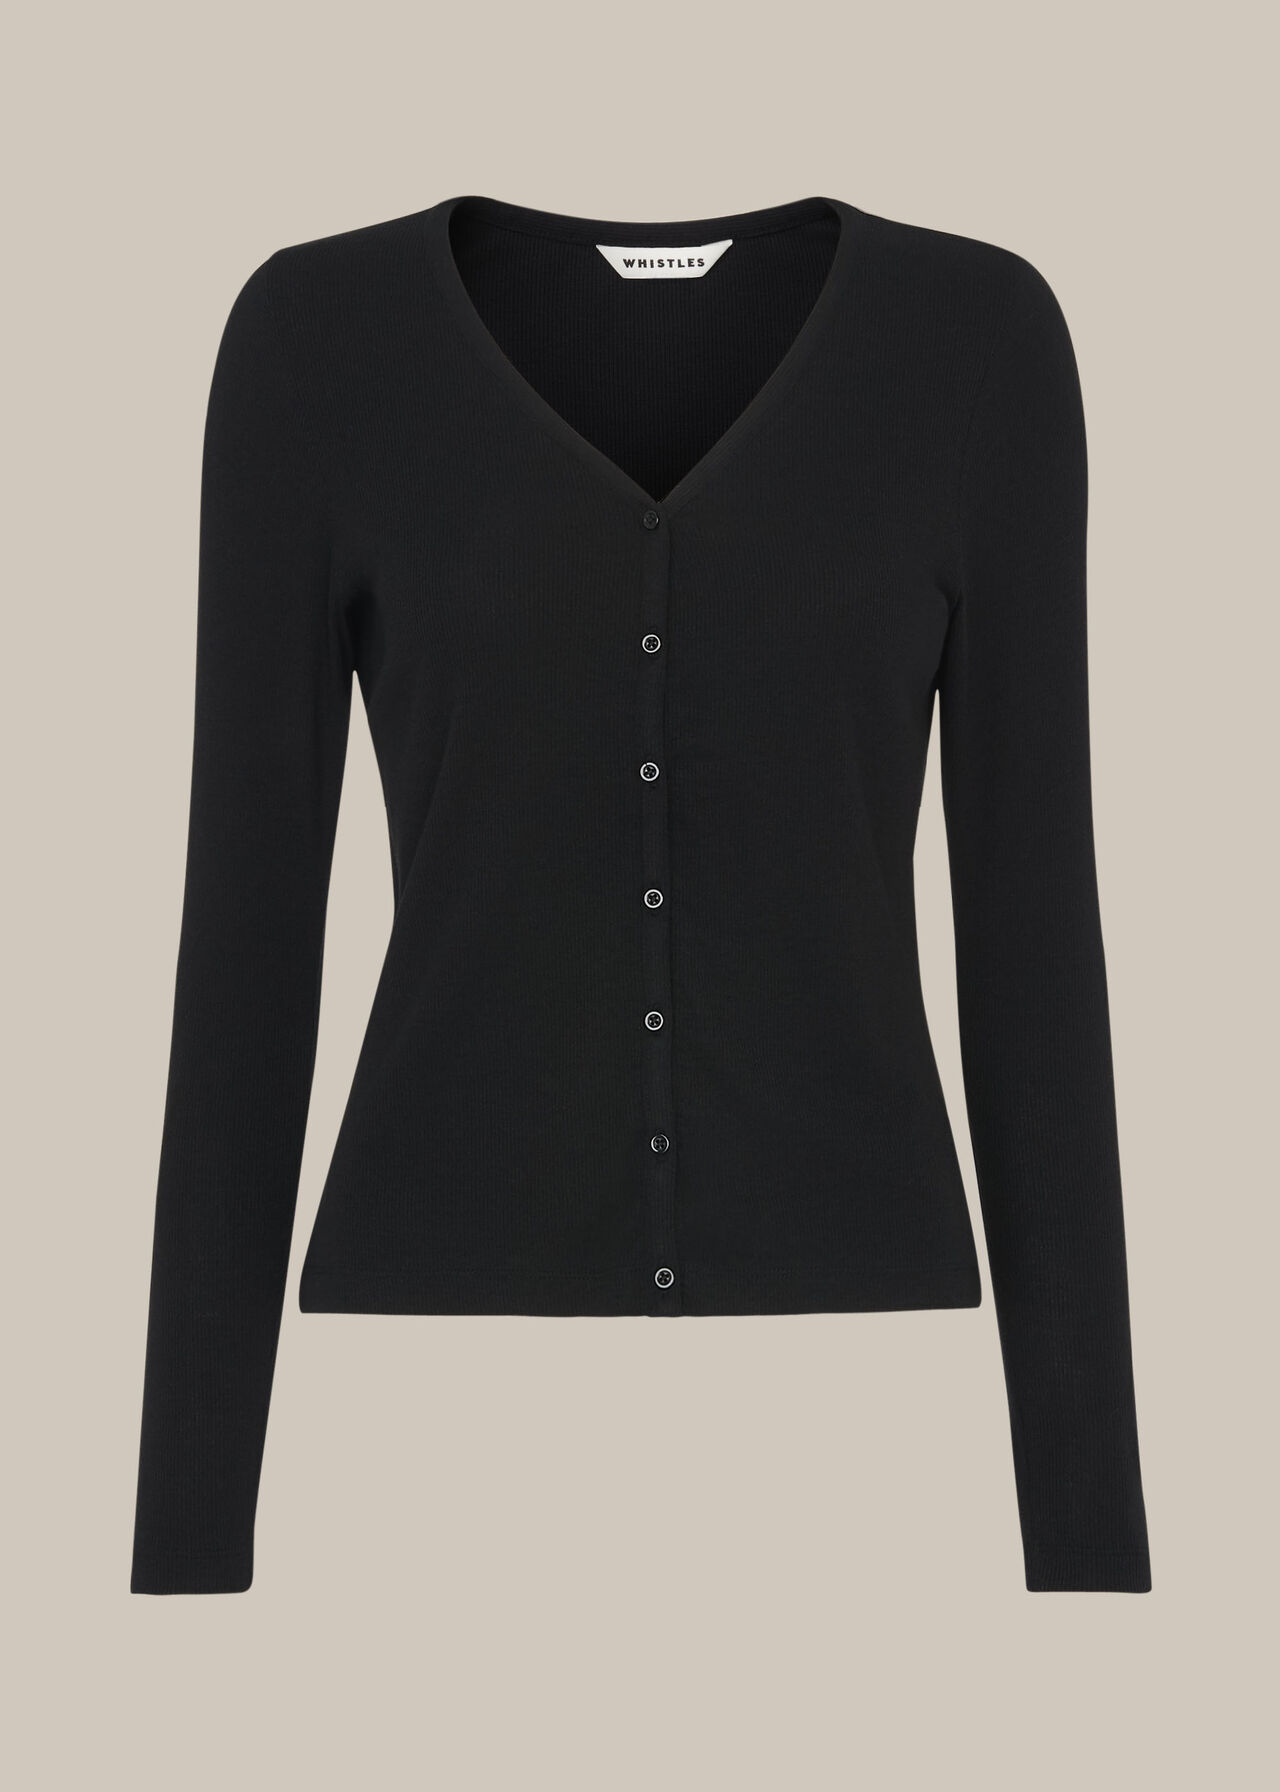 Black Button Down Ribbed Cardigan | WHISTLES